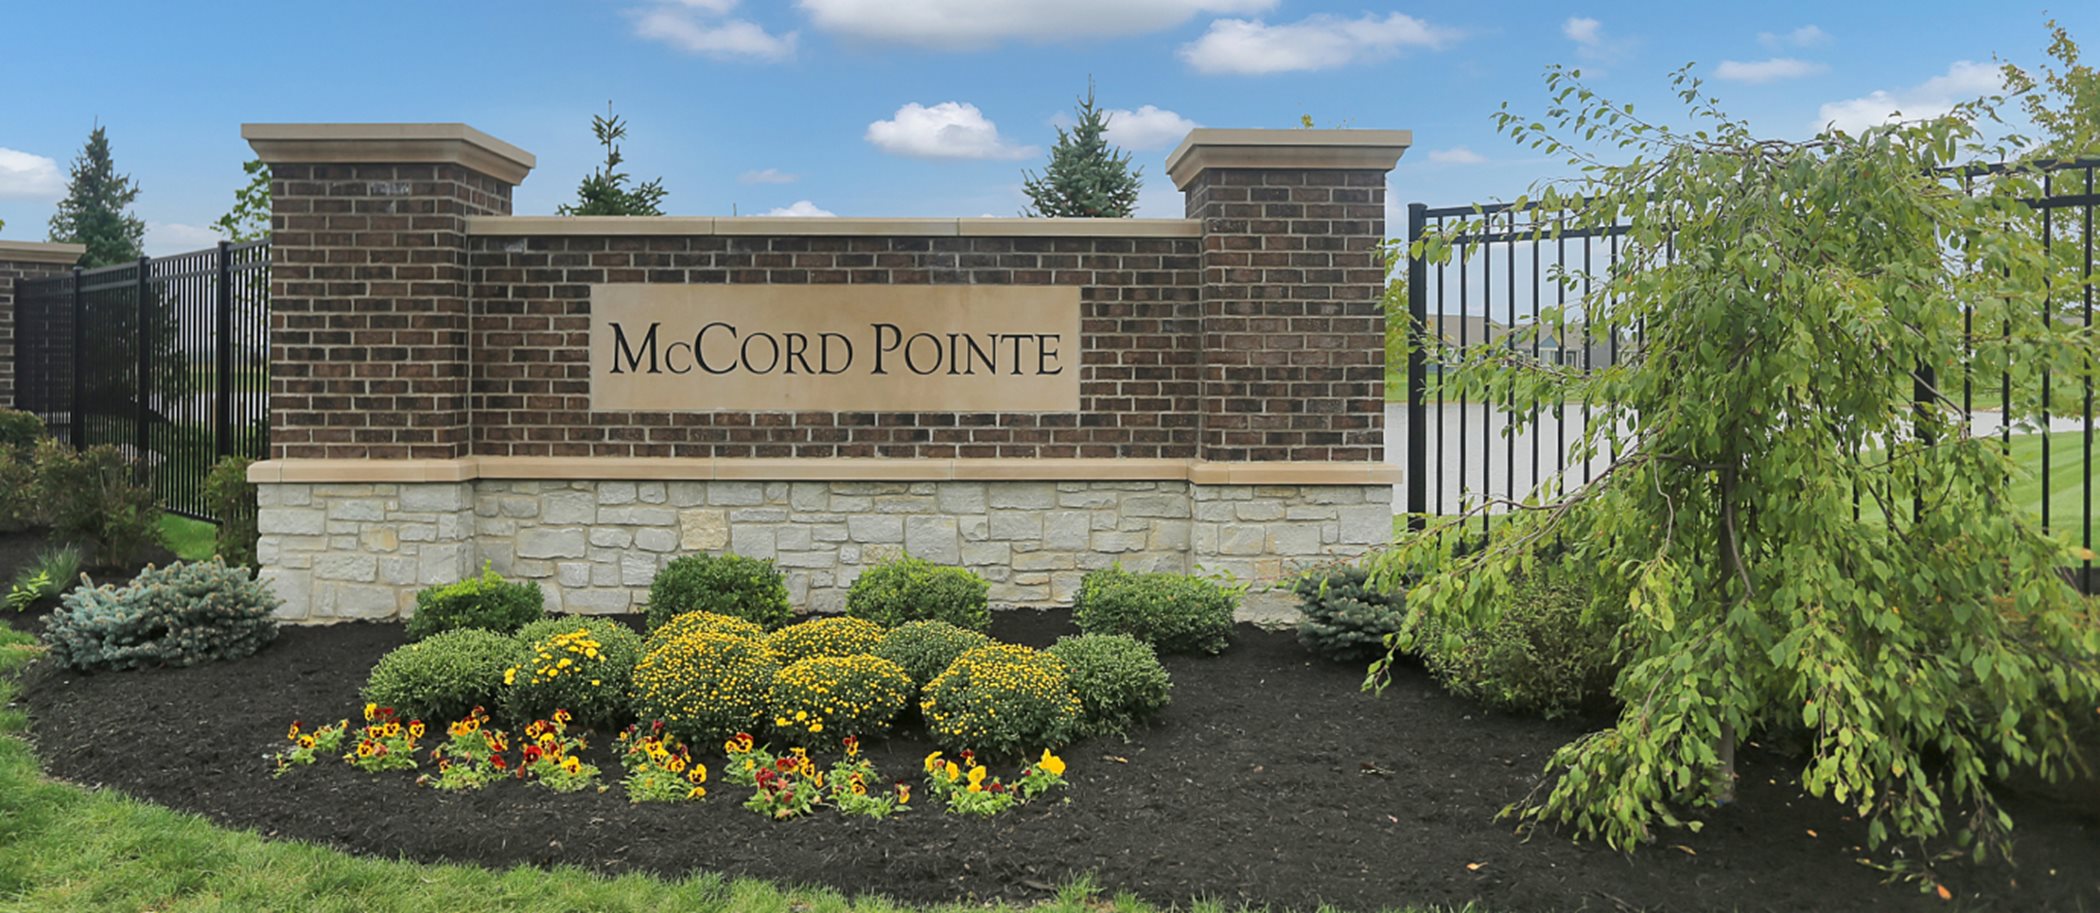 Welcome to McCord Pointe